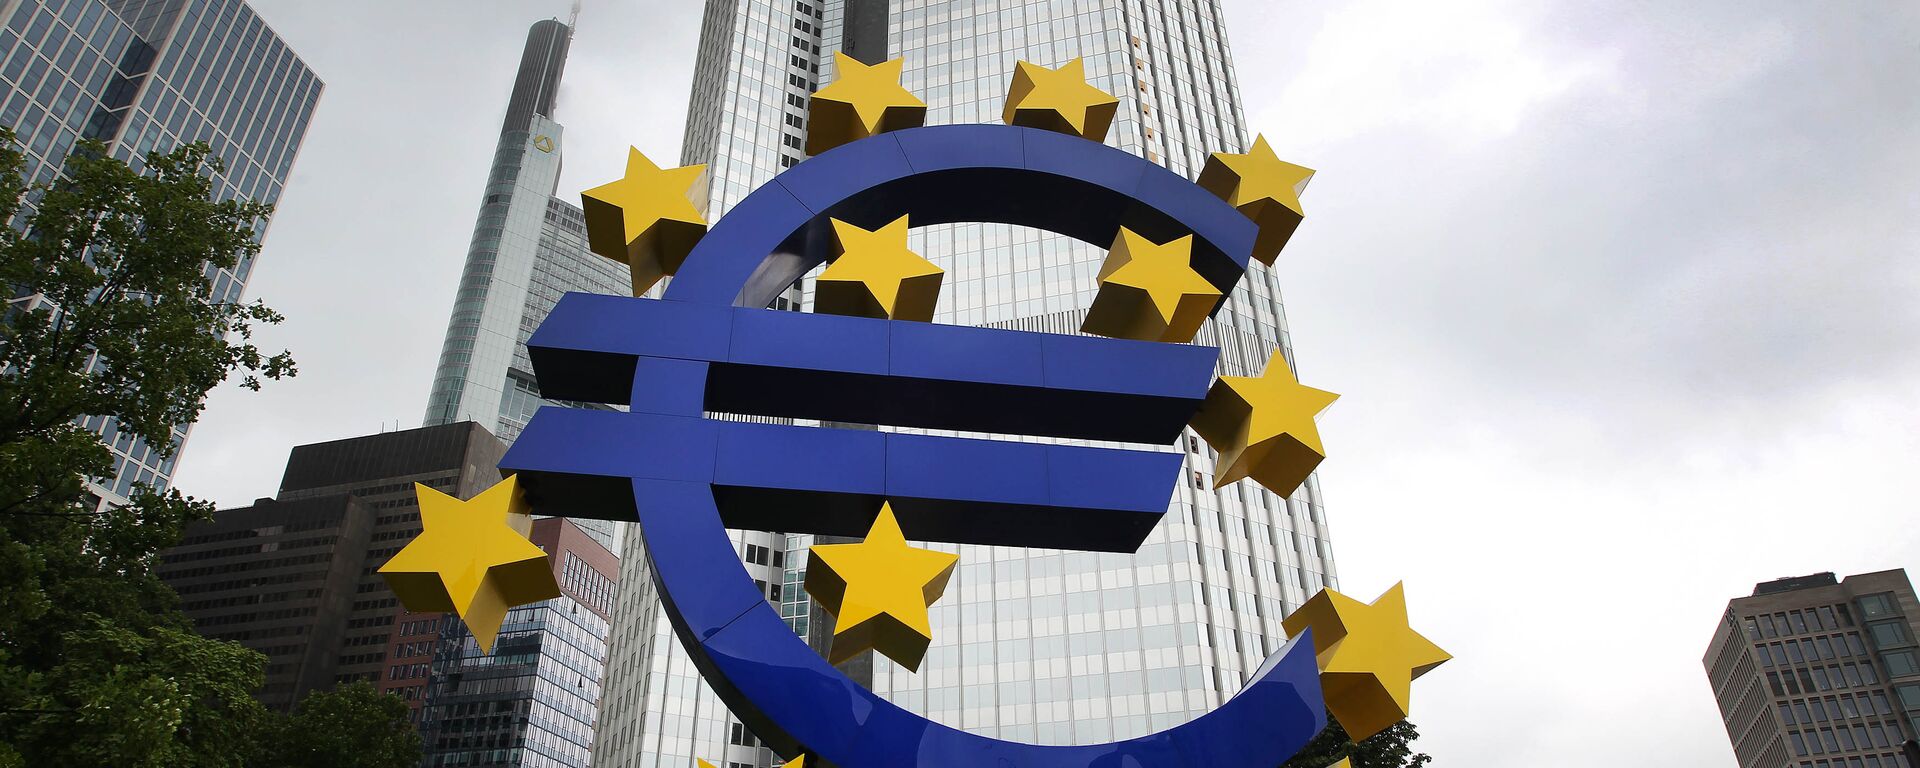 The Euro logo is pictured in front of the former headquarter of the European Central Bank (ECB) in Frankfurt am Main, western Germany, on July 20, 2015. - Sputnik International, 1920, 29.11.2023